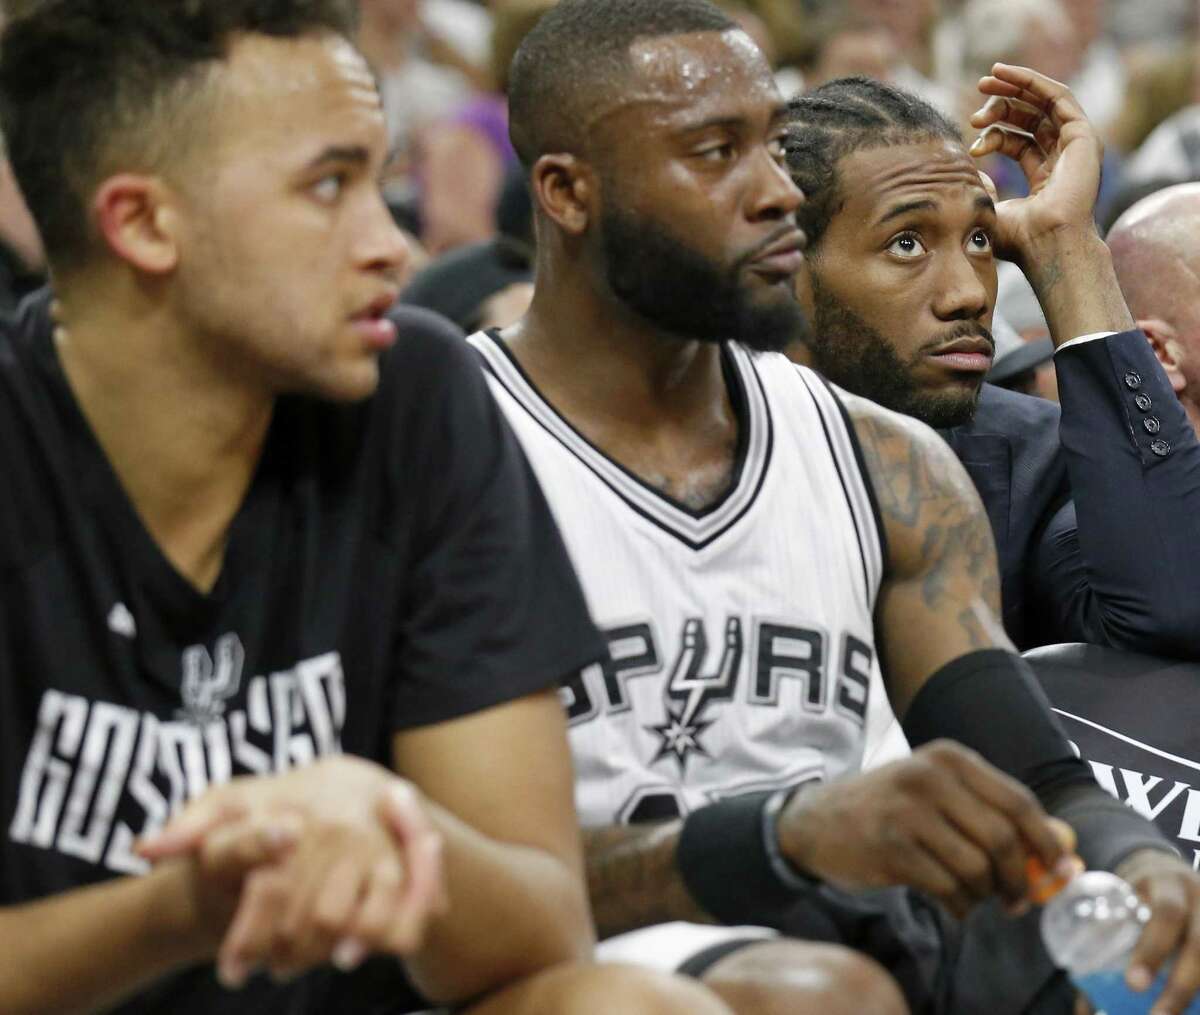 Spurs’ Kawhi Leonard sits behind the bench near teammates Kyle Anderson (left) and Jonathon Simmons during a timeout in first half action of Game 3 in the Western Conference finals against the Golden State Warriors on May 20, 2017 at the AT&T Center.